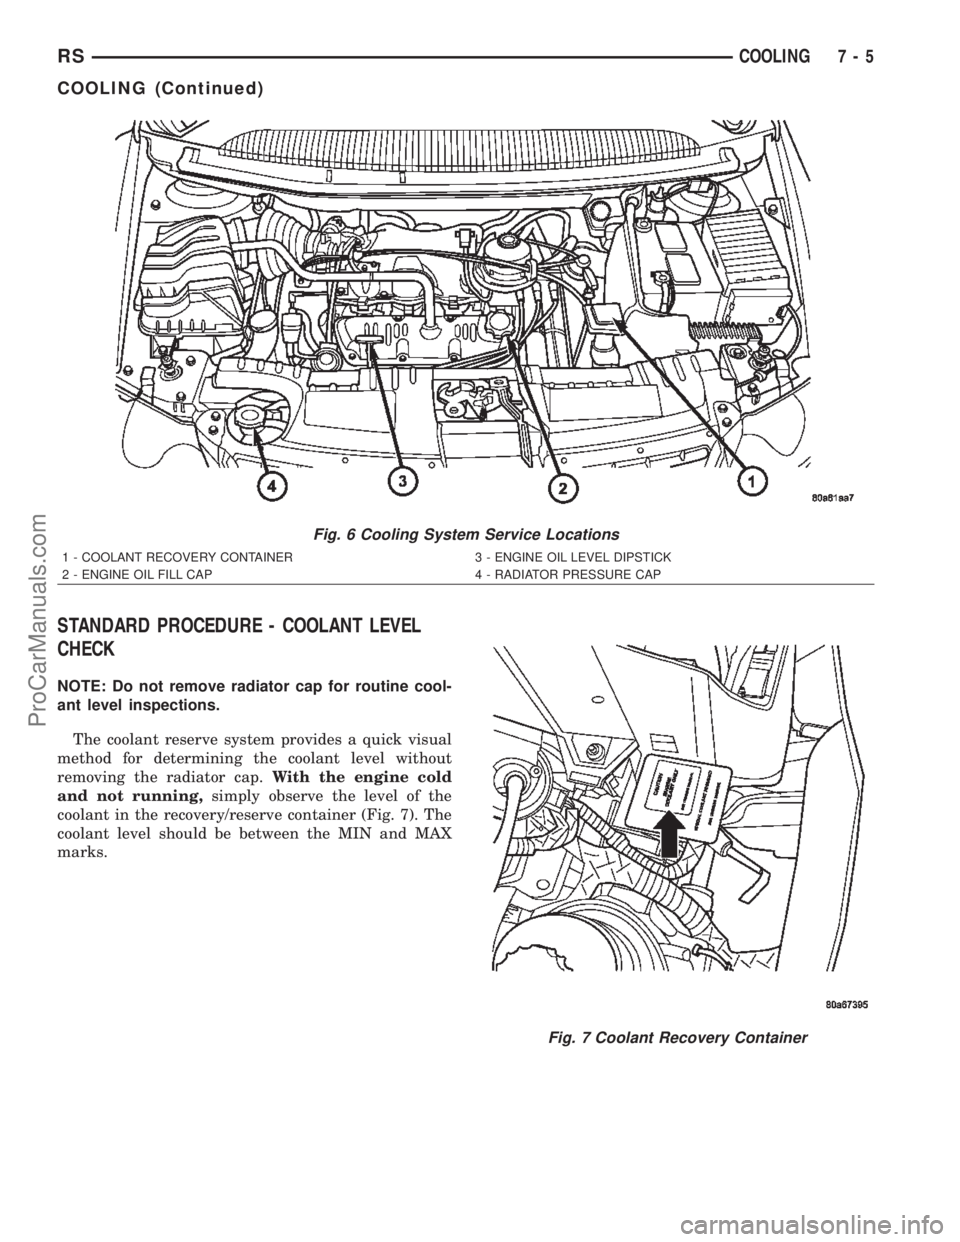 CHRYSLER TOWN AND COUNTRY 2002  Service Manual STANDARD PROCEDURE - COOLANT LEVEL
CHECK
NOTE: Do not remove radiator cap for routine cool-
ant level inspections.
The coolant reserve system provides a quick visual
method for determining the coolant